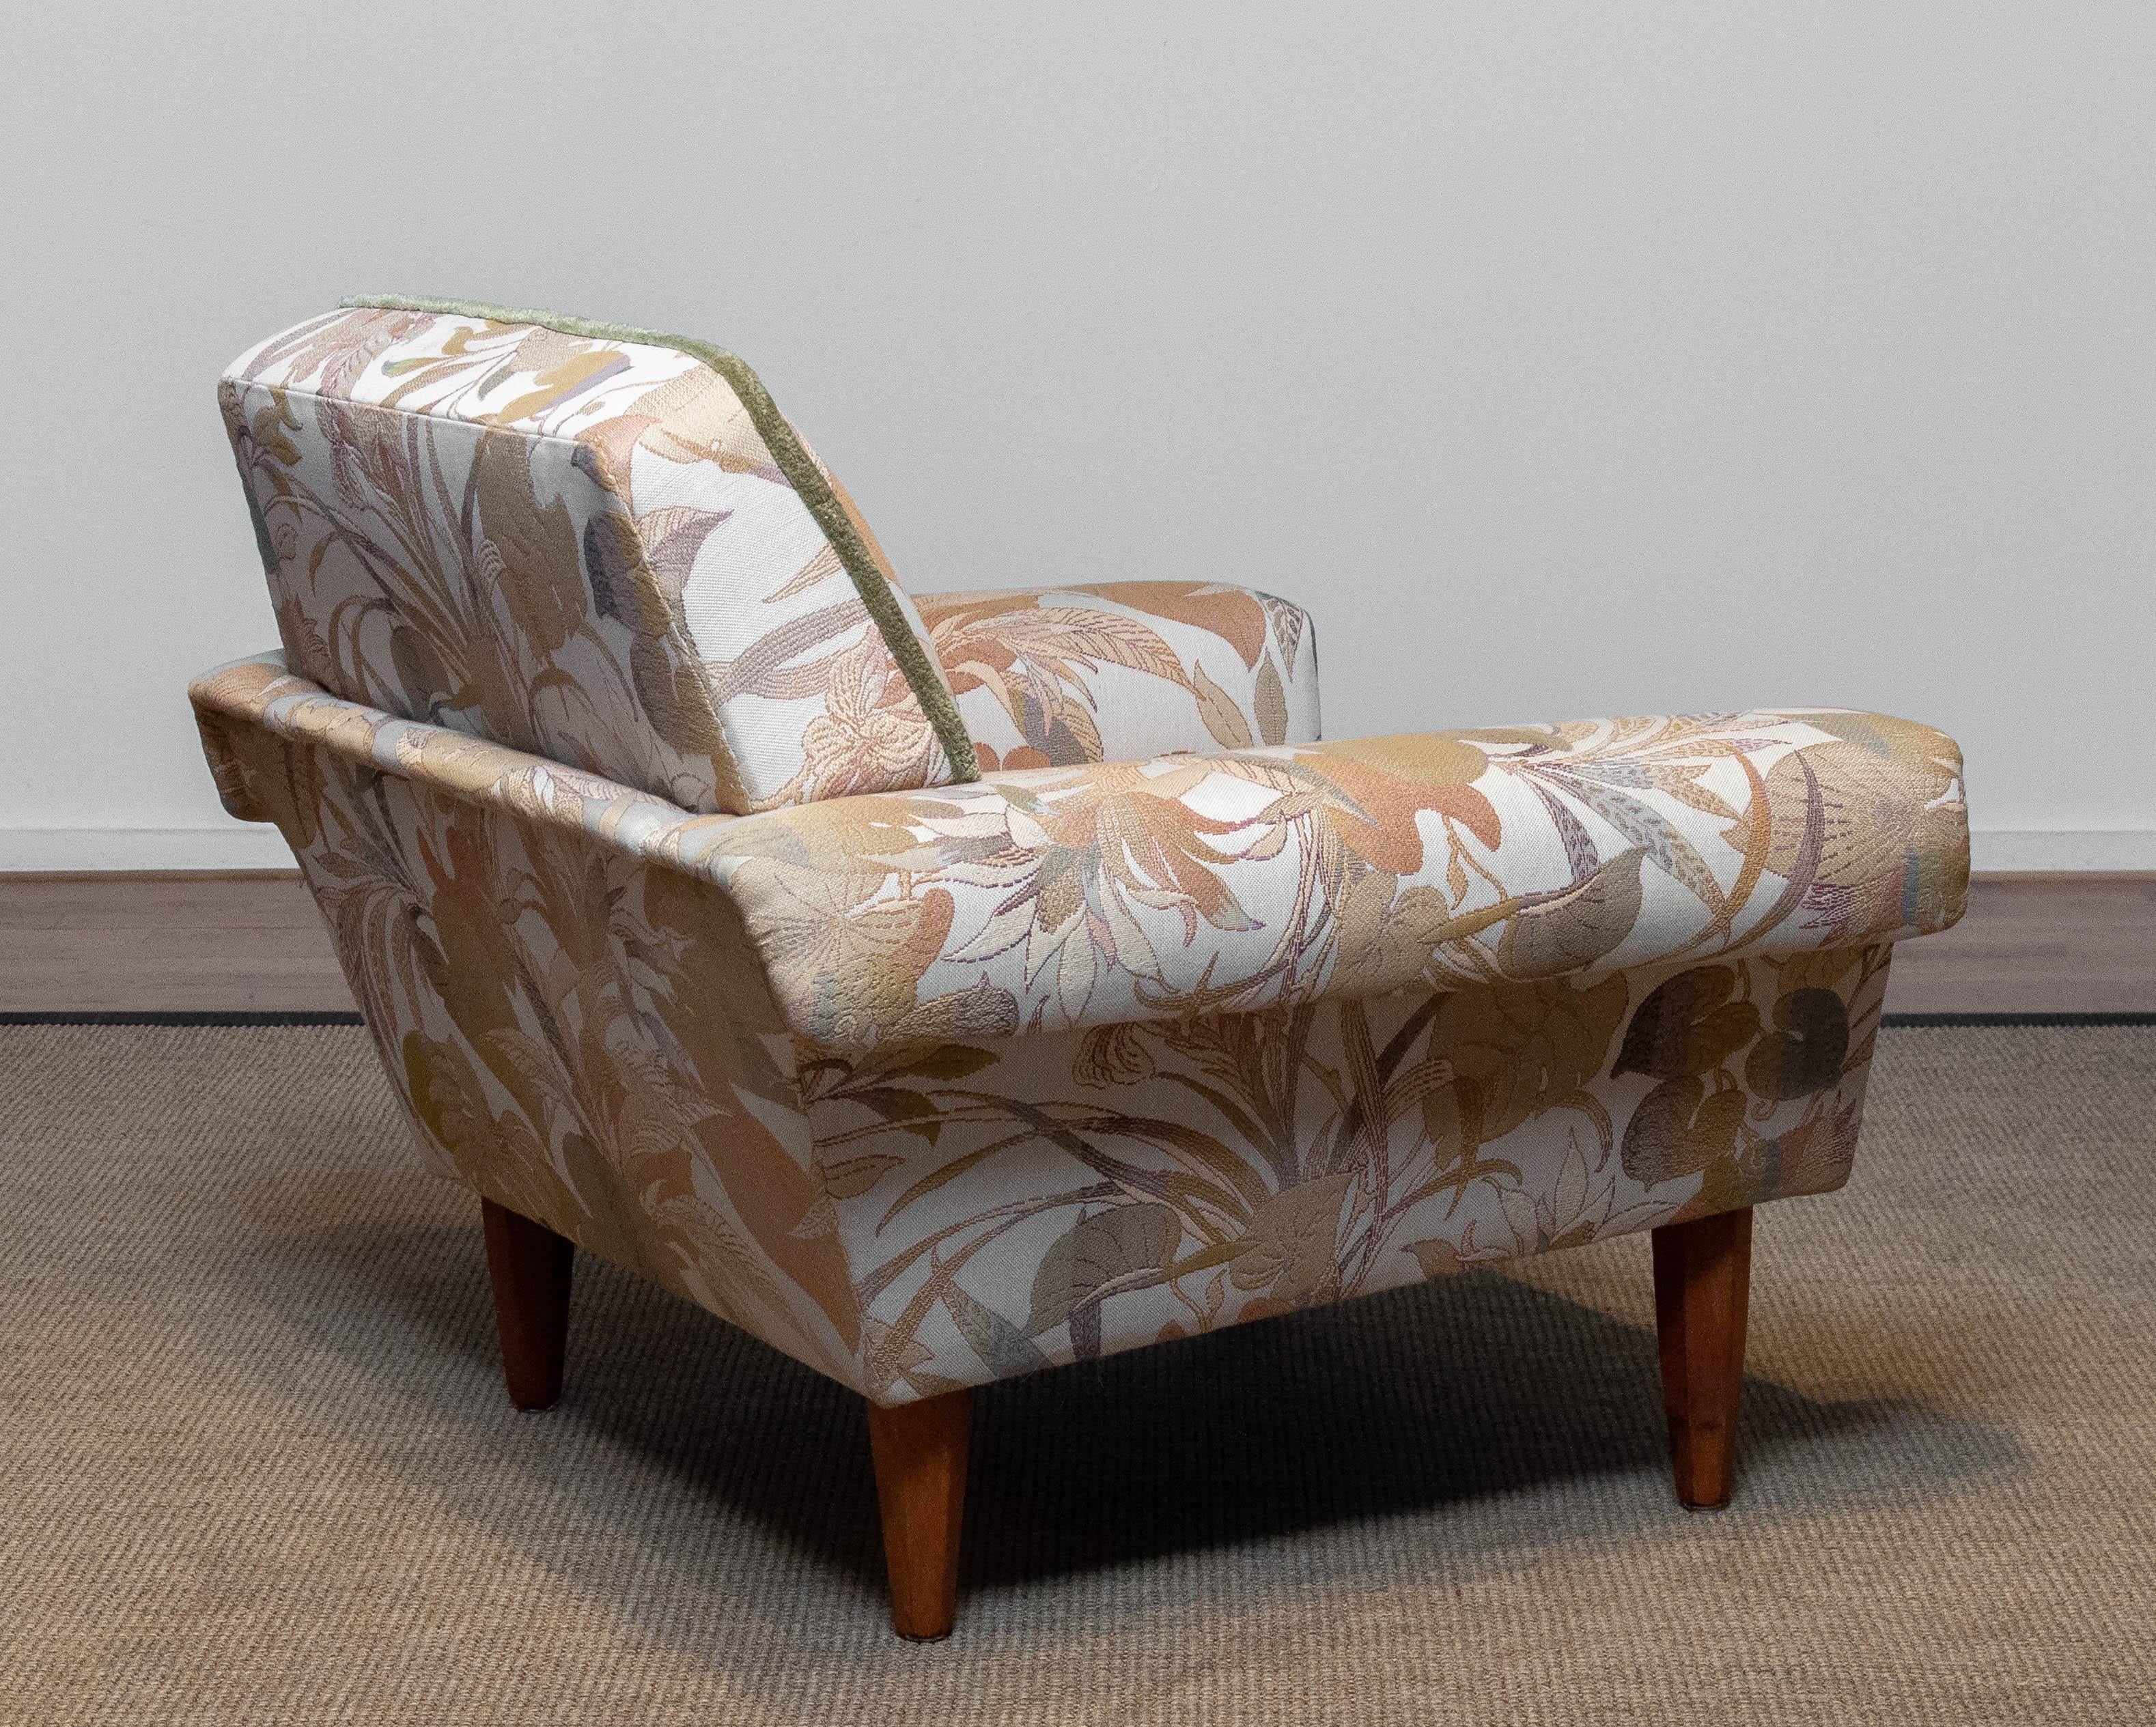 Danish Low Back Lounge Chair Upholstered Floral Jacquard Fabric from the 1970's For Sale 2